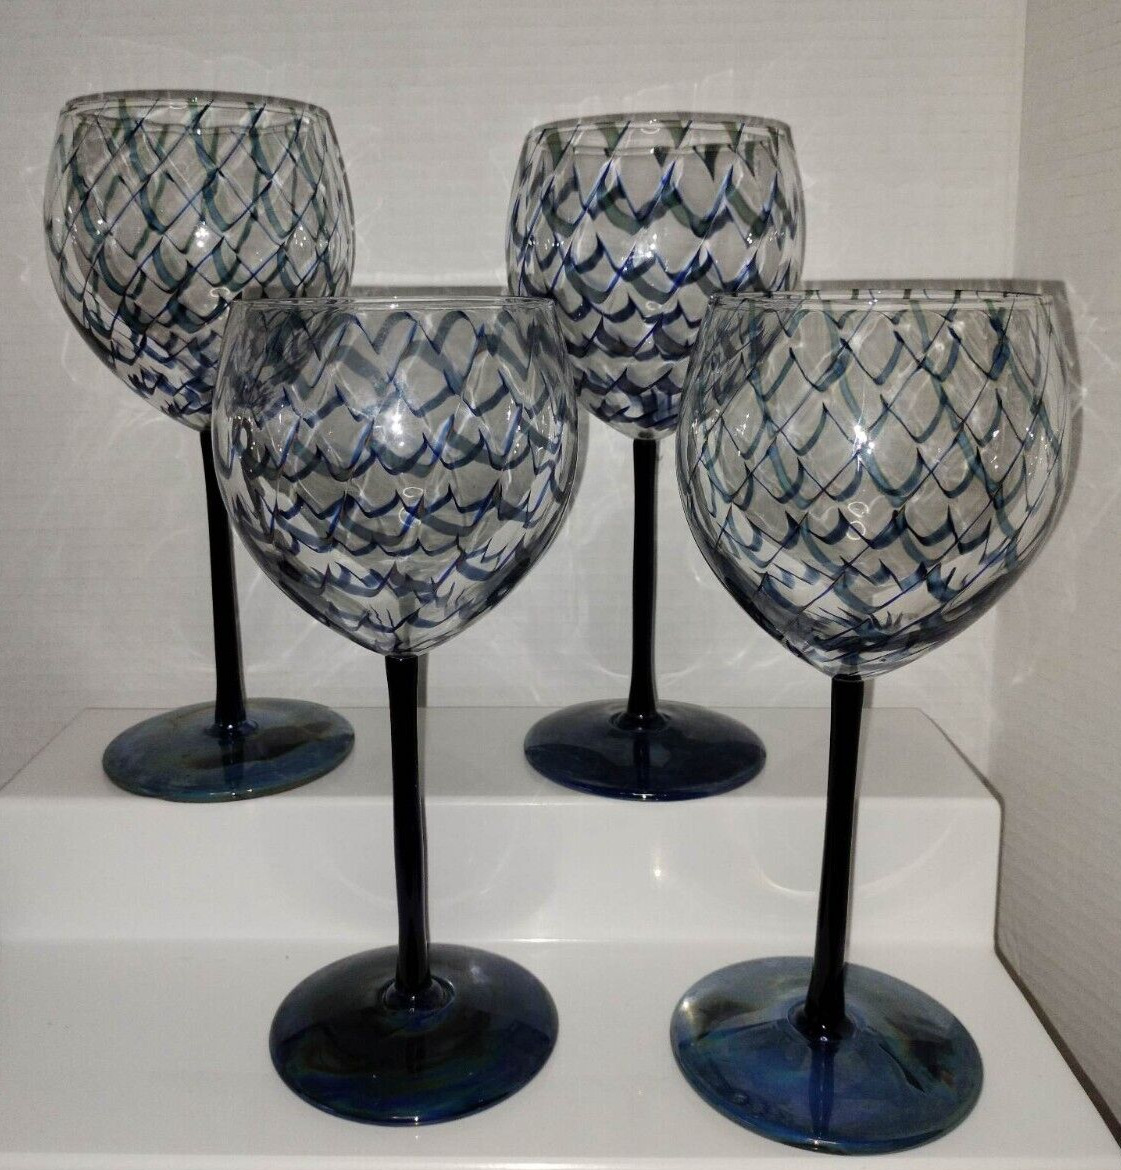 1979 RANDY STRONG/SIGNED STUDIO CREATIVE GLASS /WINE GOBLETS/ SET OF 4